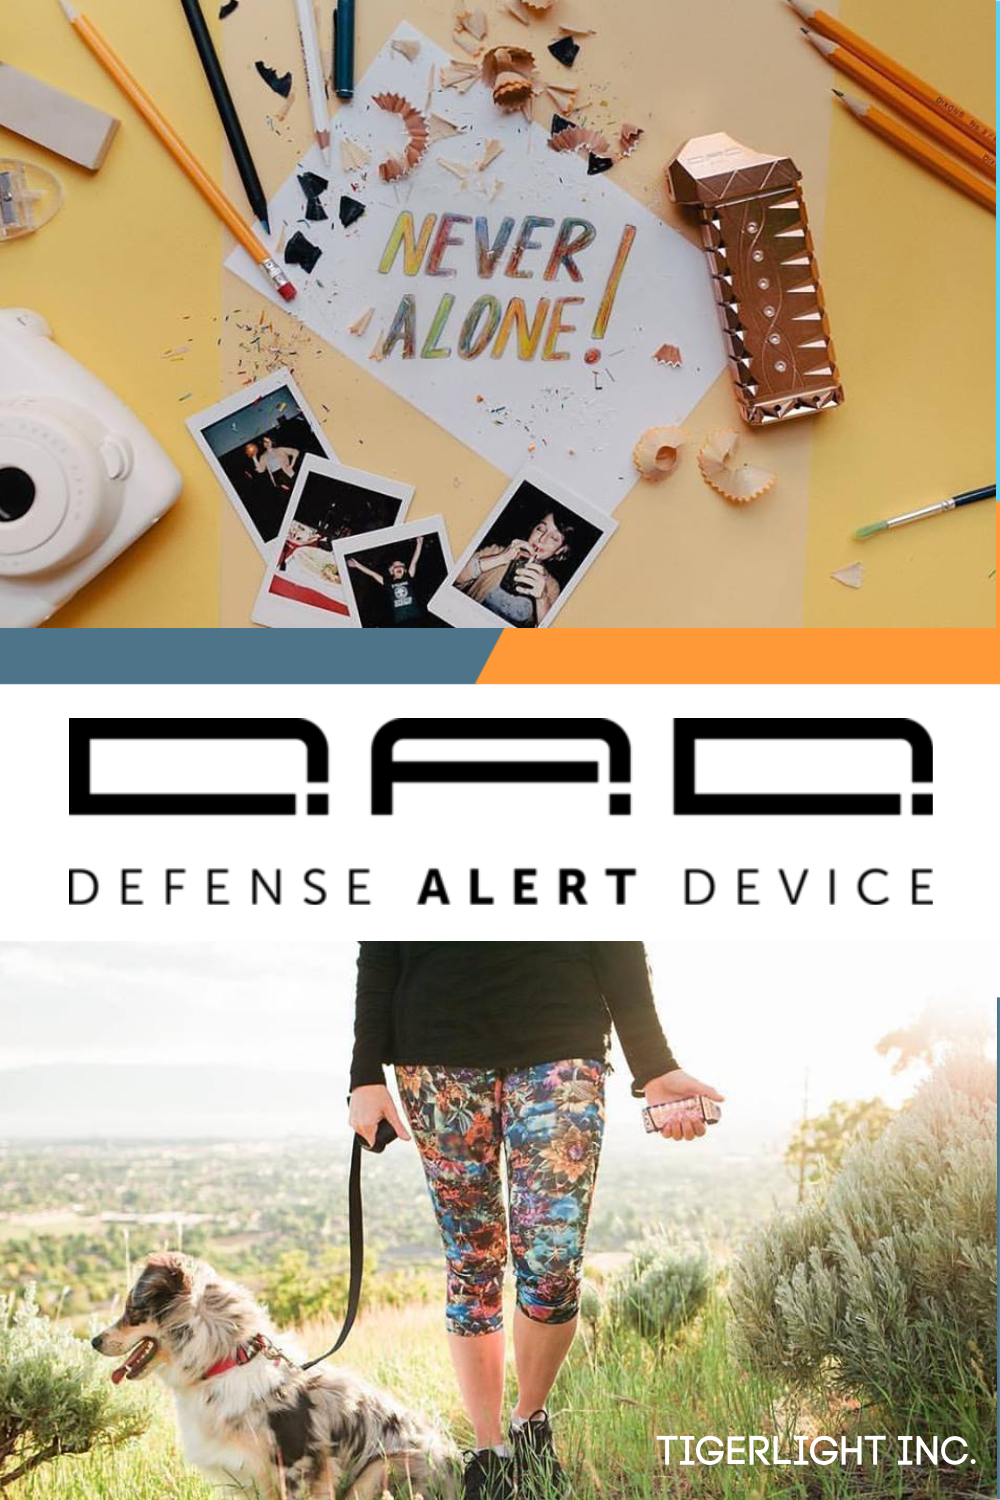 The D.A.D.® (Defense Alert Device) is the first non-lethal personal safety device with smart technology. Each device is equipped with Bluetooth to send an emergency alert via your cell phone. #Tigerlight #BeBold #NeverAlone